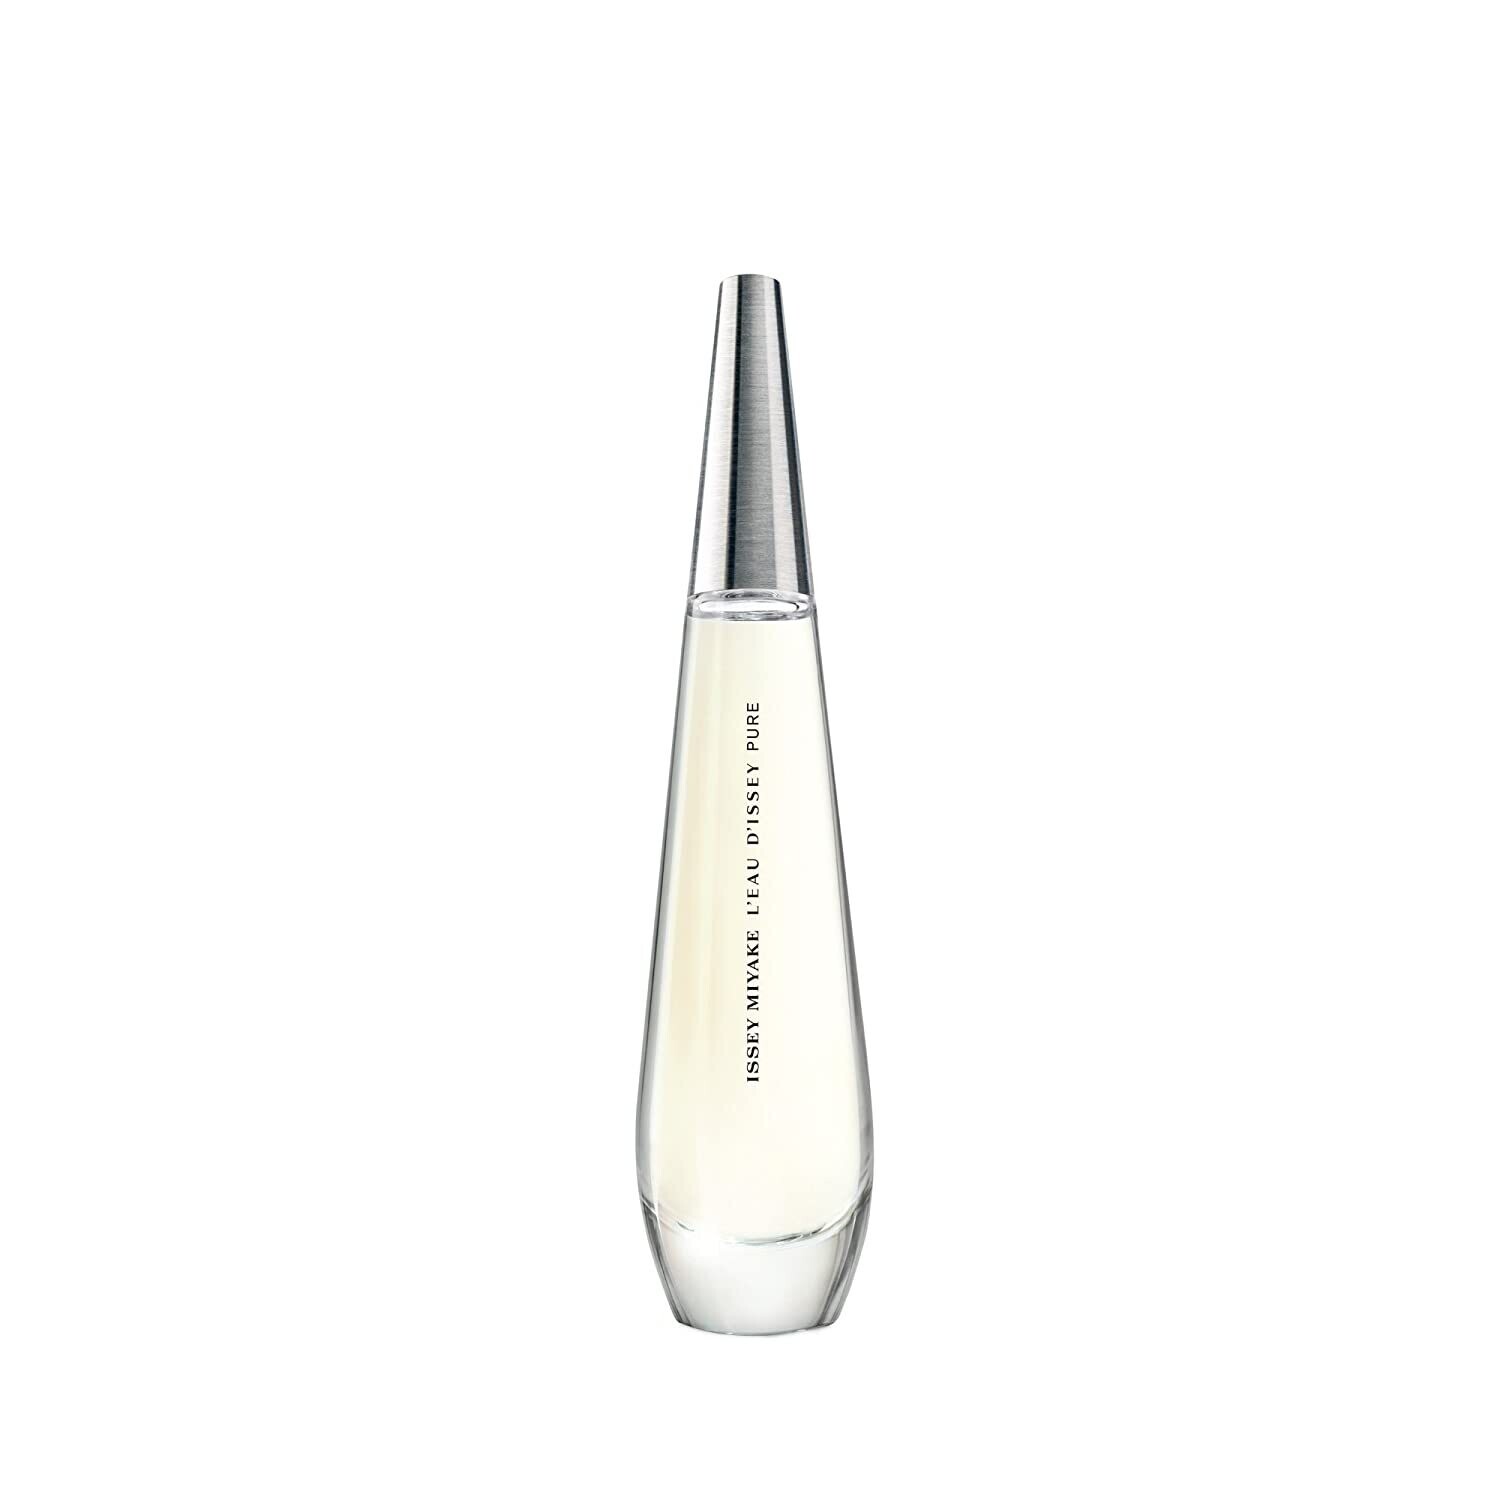 ISSEY MIYAKE L’EAU D’ISSEY PURE EDT 10 ML FOR WOMEN MINIATURE